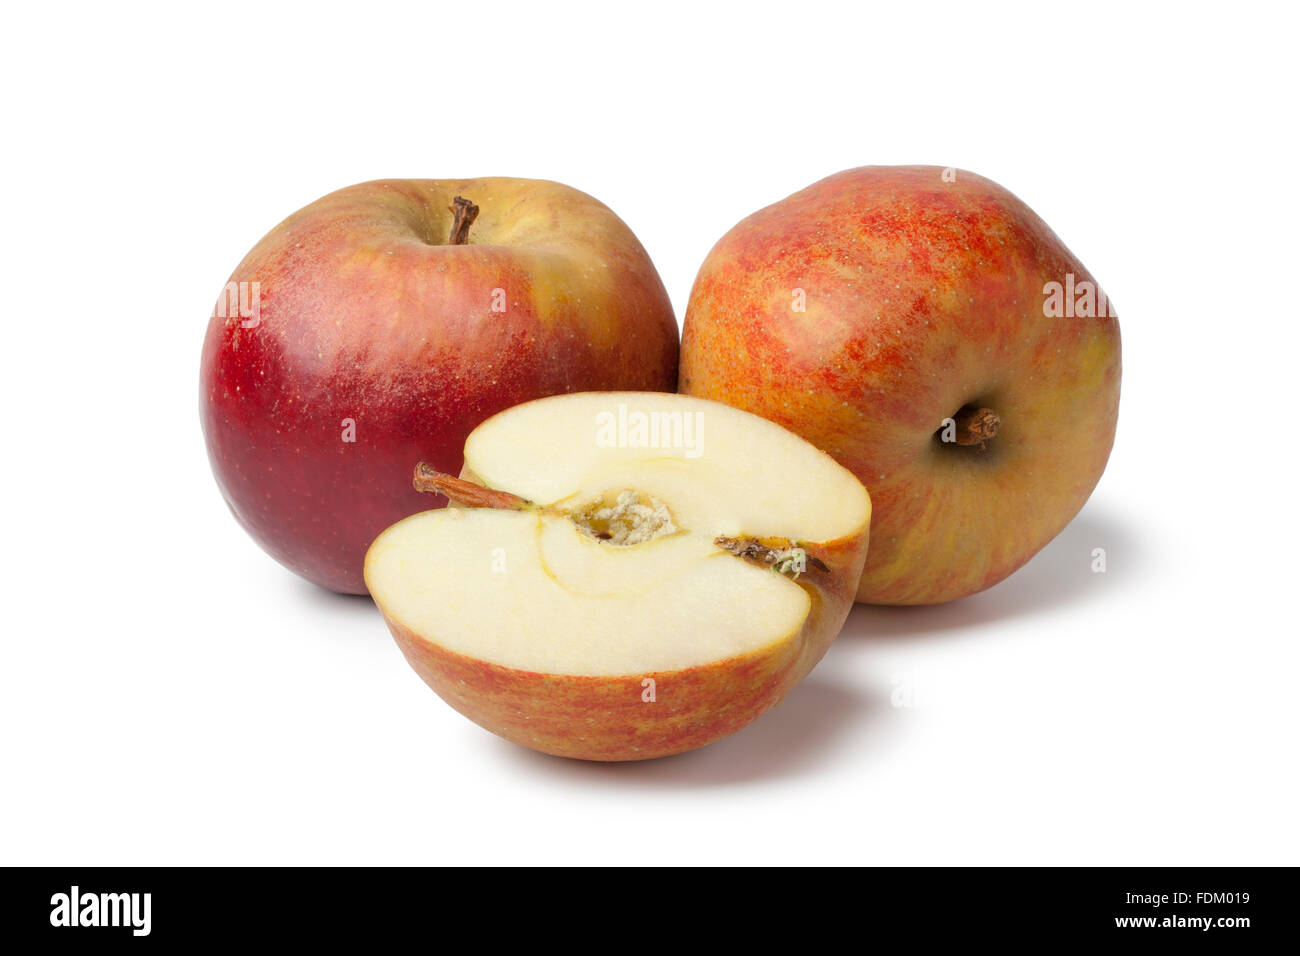 Whole and half Belle de Boskoop apples on white background Stock Photo